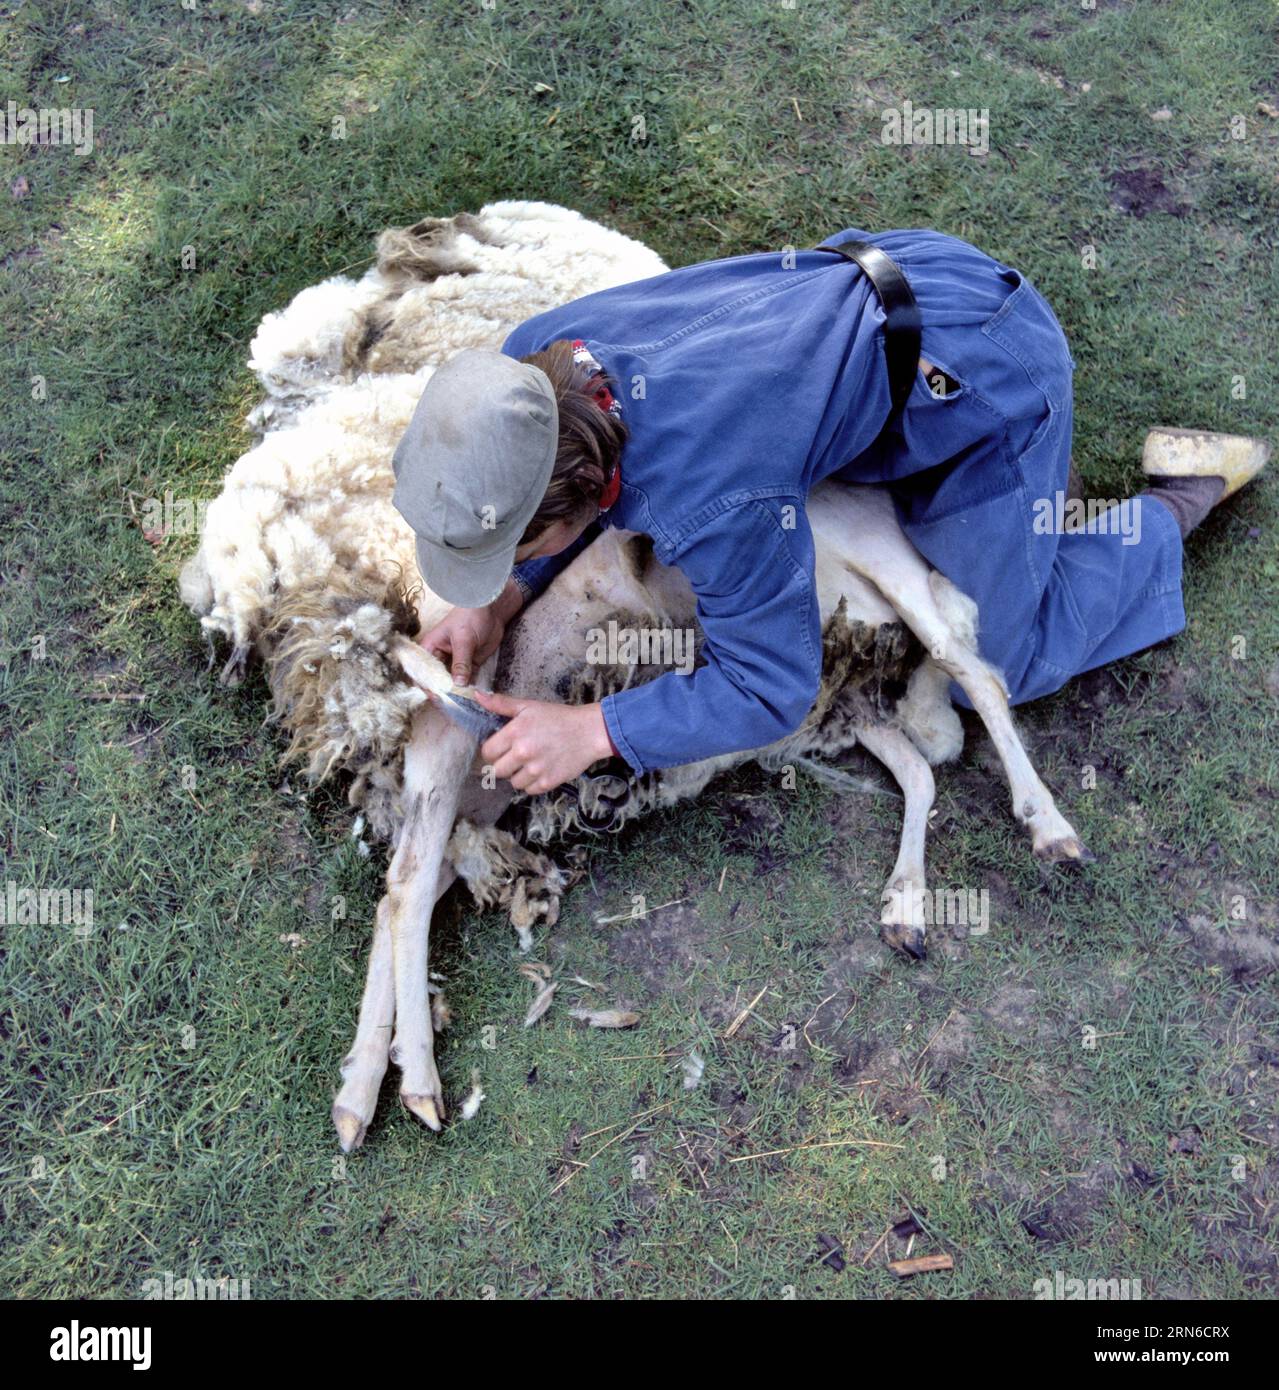 Sheep wool shearing by farmer. Old fashioned scissor shearing the wool from sheep. Stock Photo